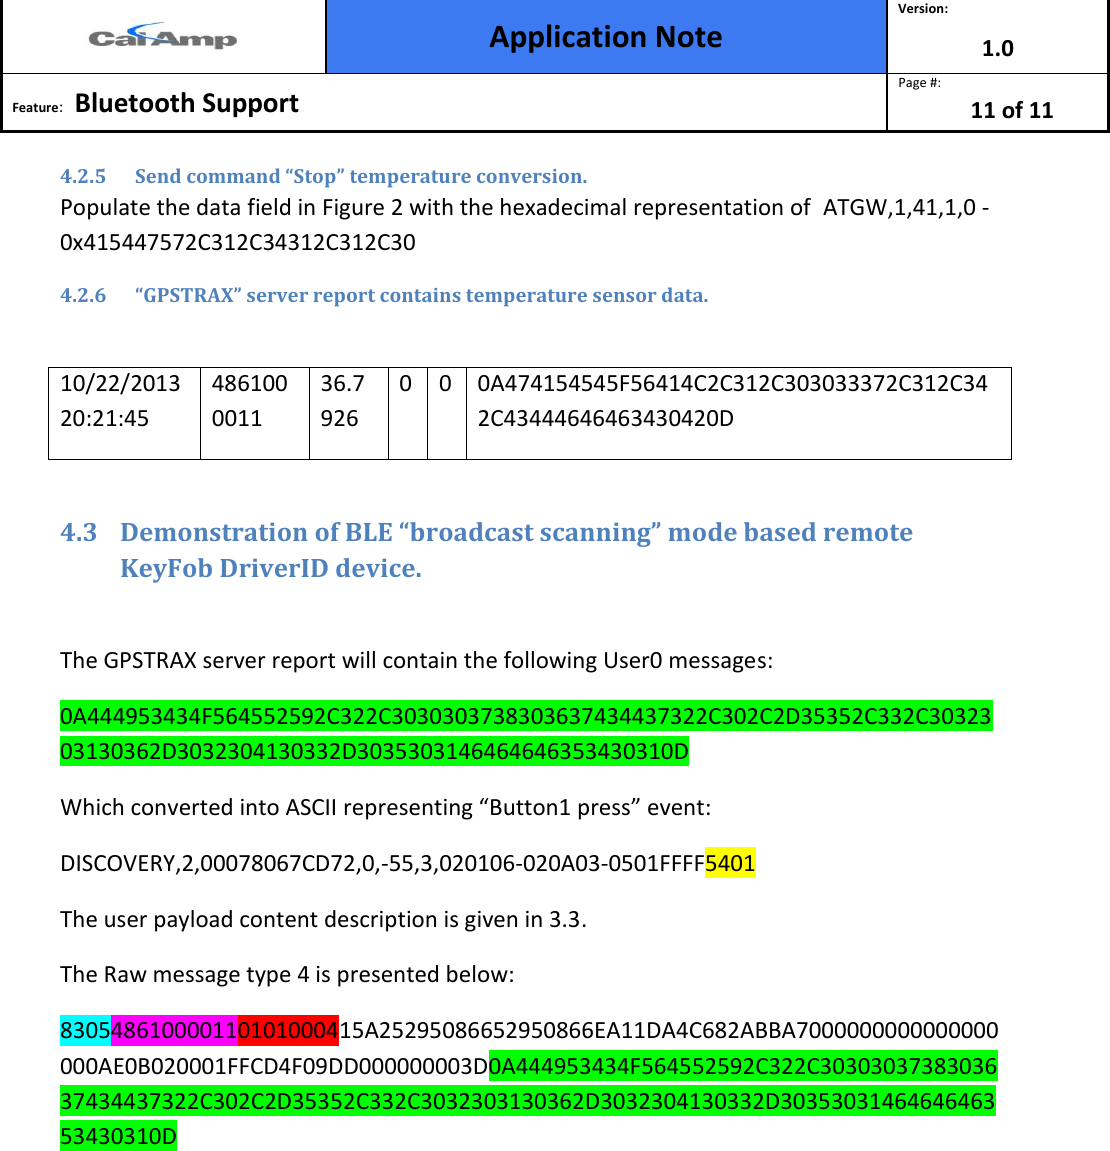  Application Note Version: 1.0  Feature:   Bluetooth Support  Page #: 11 of 11   4.2.5 Send command “Stop” temperature conversion. Populate the data field in Figure 2 with the hexadecimal representation of  ATGW,1,41,1,0 - 0x415447572C312C34312C312C30 4.2.6 “GPSTRAX” server report contains temperature sensor data.  10/22/2013 20:21:45 4861000011 36.7926 0 0 0A474154545F56414C2C312C303033372C312C342C43444646463430420D  4.3 Demonstration of BLE “broadcast scanning” mode based remote KeyFob DriverID device.  The GPSTRAX server report will contain the following User0 messages: 0A444953434F564552592C322C3030303738303637434437322C302C2D35352C332C3032303130362D3032304130332D3035303146464646353430310D Which converted into ASCII representing “Button1 press” event: DISCOVERY,2,00078067CD72,0,-55,3,020106-020A03-0501FFFF5401  The user payload content description is given in 3.3. The Raw message type 4 is presented below: 830548610000110101000415A25295086652950866EA11DA4C682ABBA7000000000000000000AE0B020001FFCD4F09DD000000003D0A444953434F564552592C322C3030303738303637434437322C302C2D35352C332C3032303130362D3032304130332D3035303146464646353430310D   